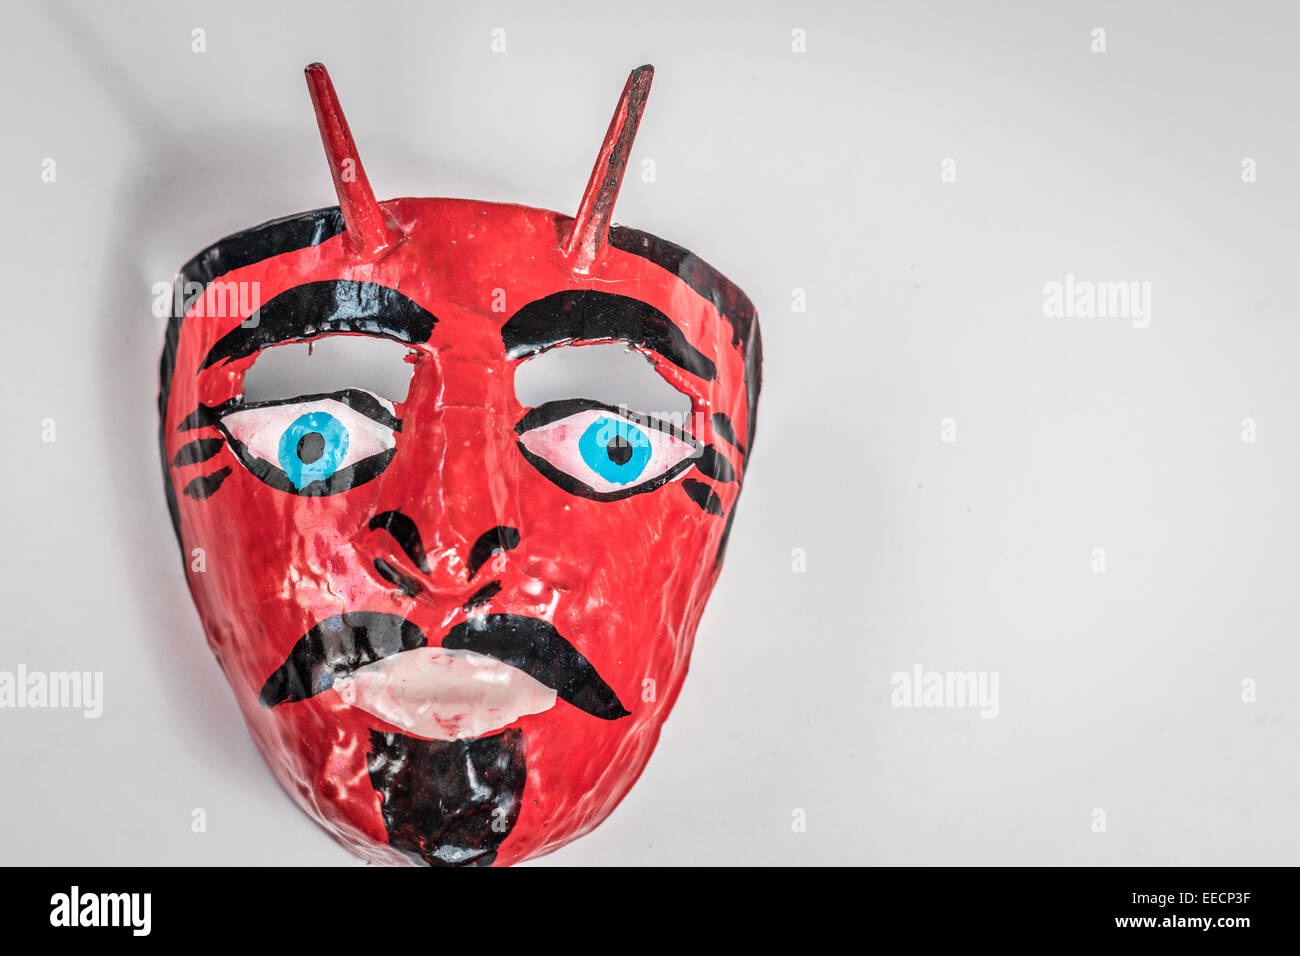 File:Paper mache mask with feet, front view with red background.JPG -  Wikipedia